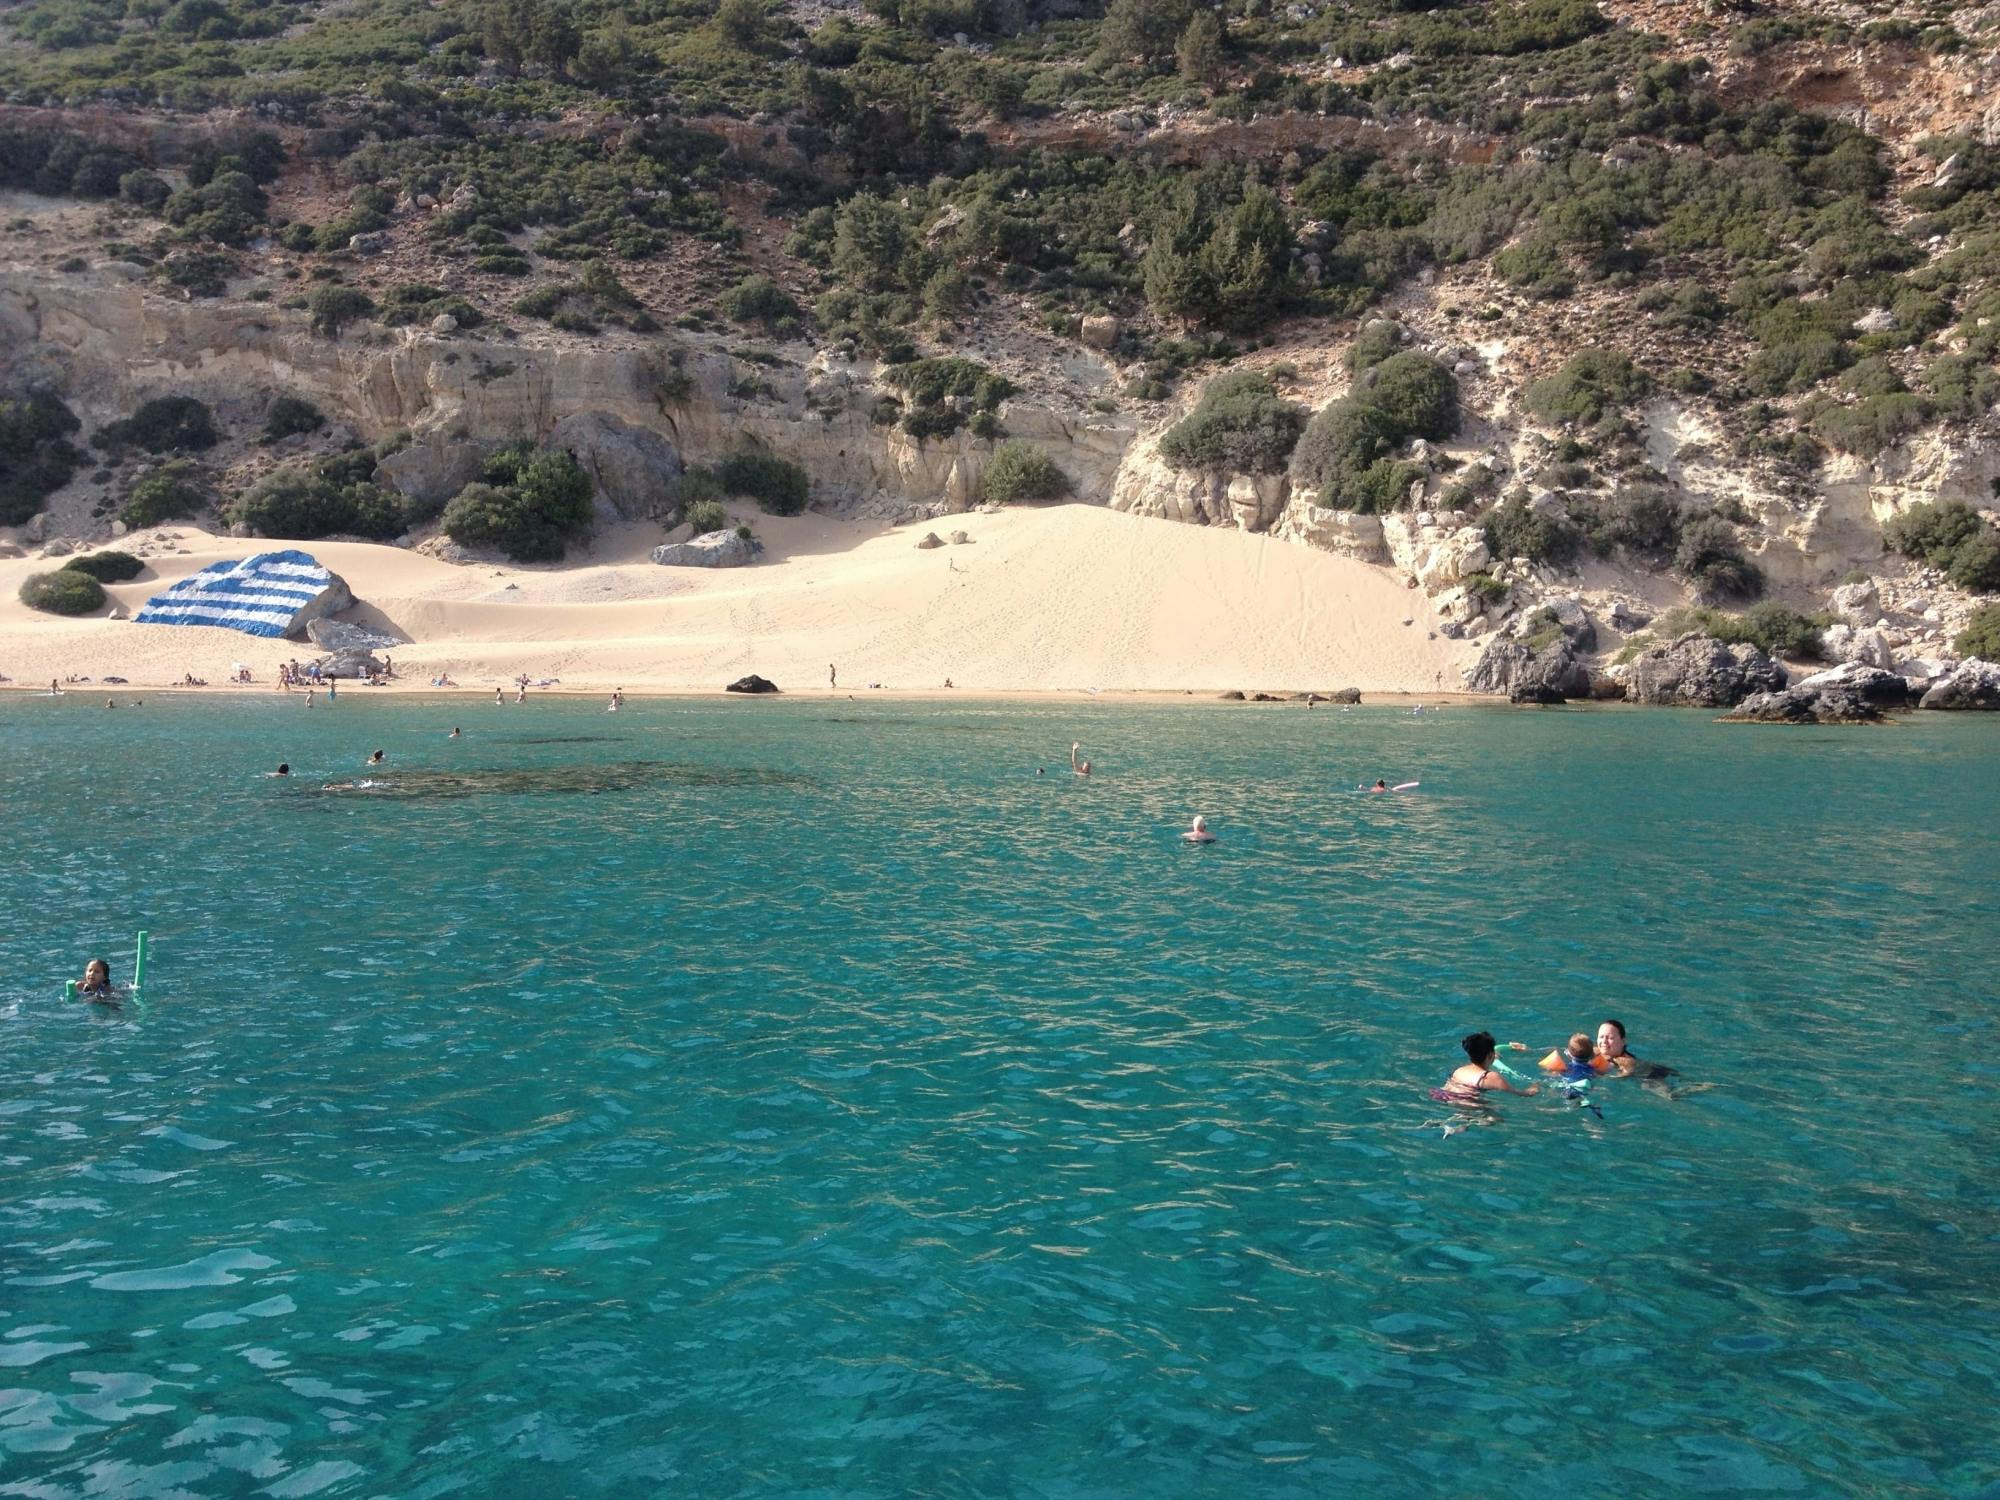 Boat Trip to Lindos with Swim Stops from Kolymbia Port